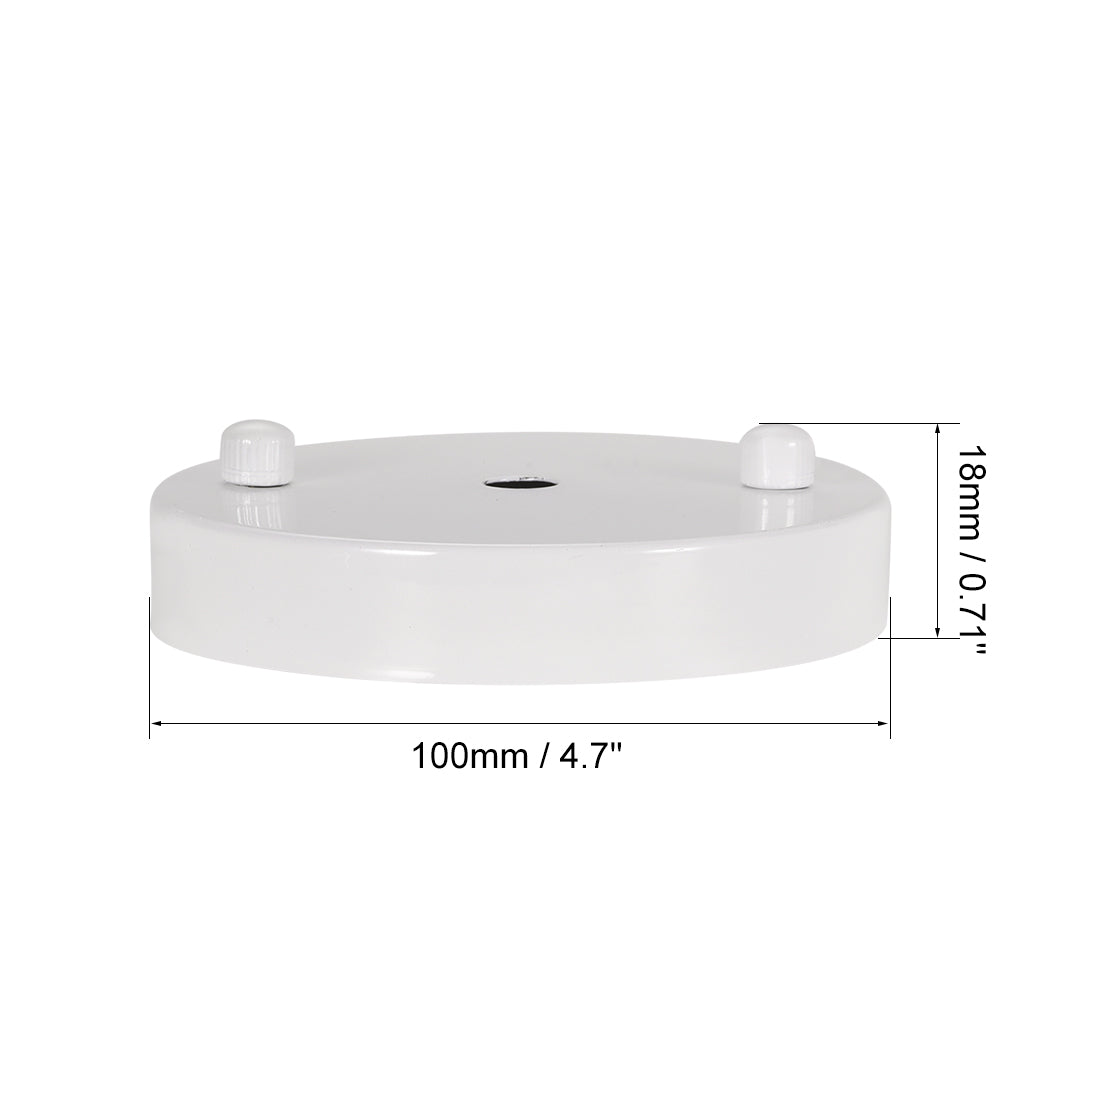 Uxcell Uxcell Retro Light Canopy Kit Pendant Lighting Ceiling Plate 100mm 3.9Inch White